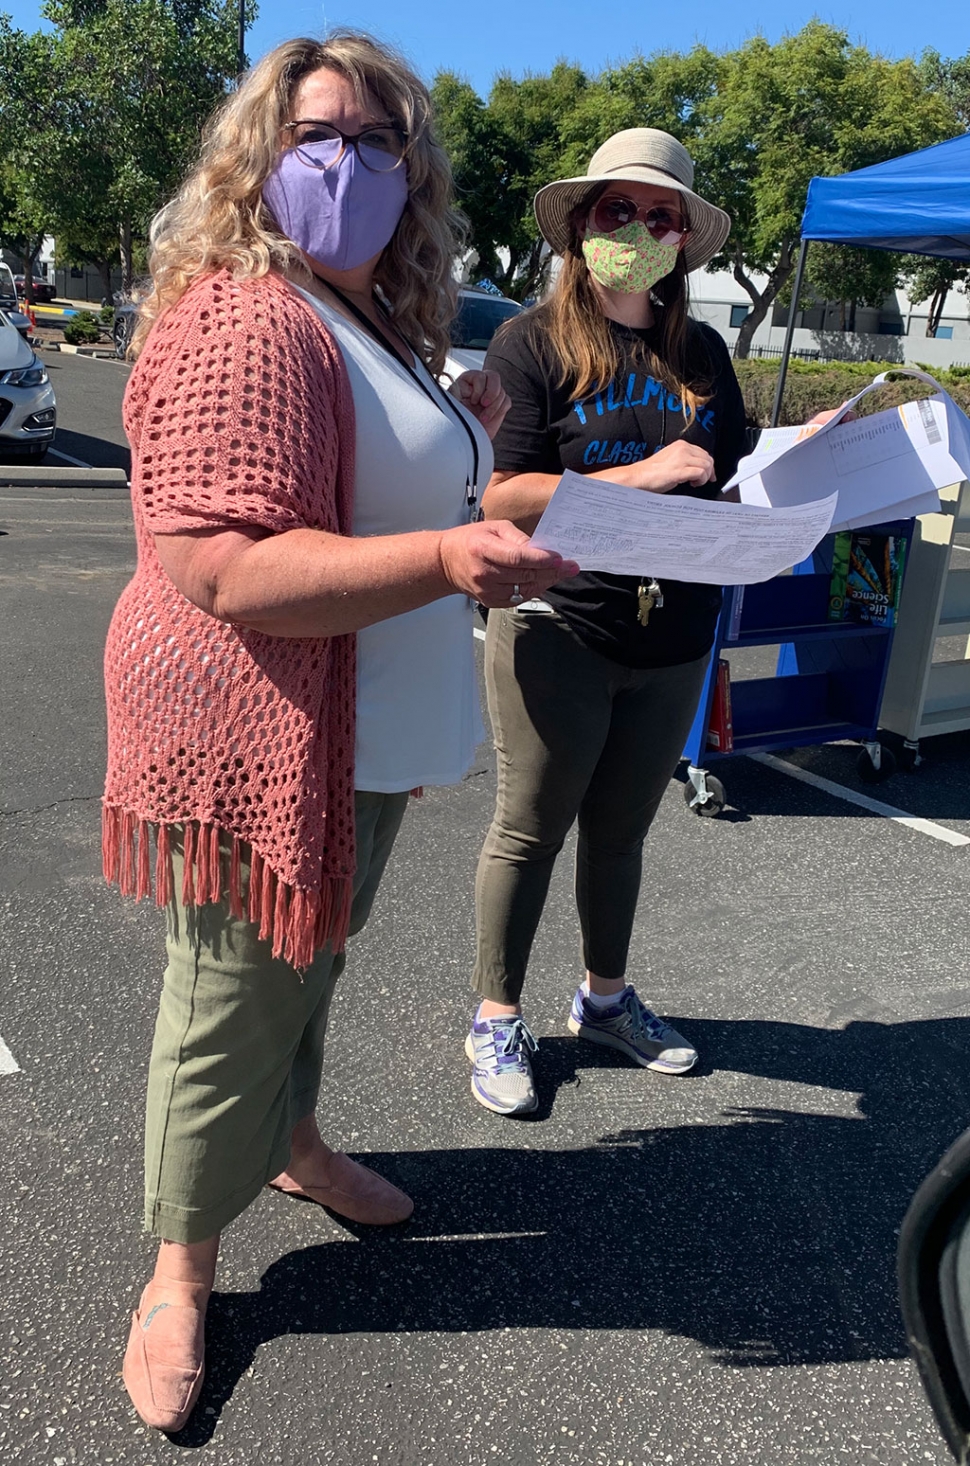 Preparing for remote school to begin, drive-thru pickup was open last Wednesday, August 12th at the Fillmore Middle School parking lot. Nurse Karen was there to collect immunization records, while Assistant VP Cara checked to make sure everyone was enrolled.